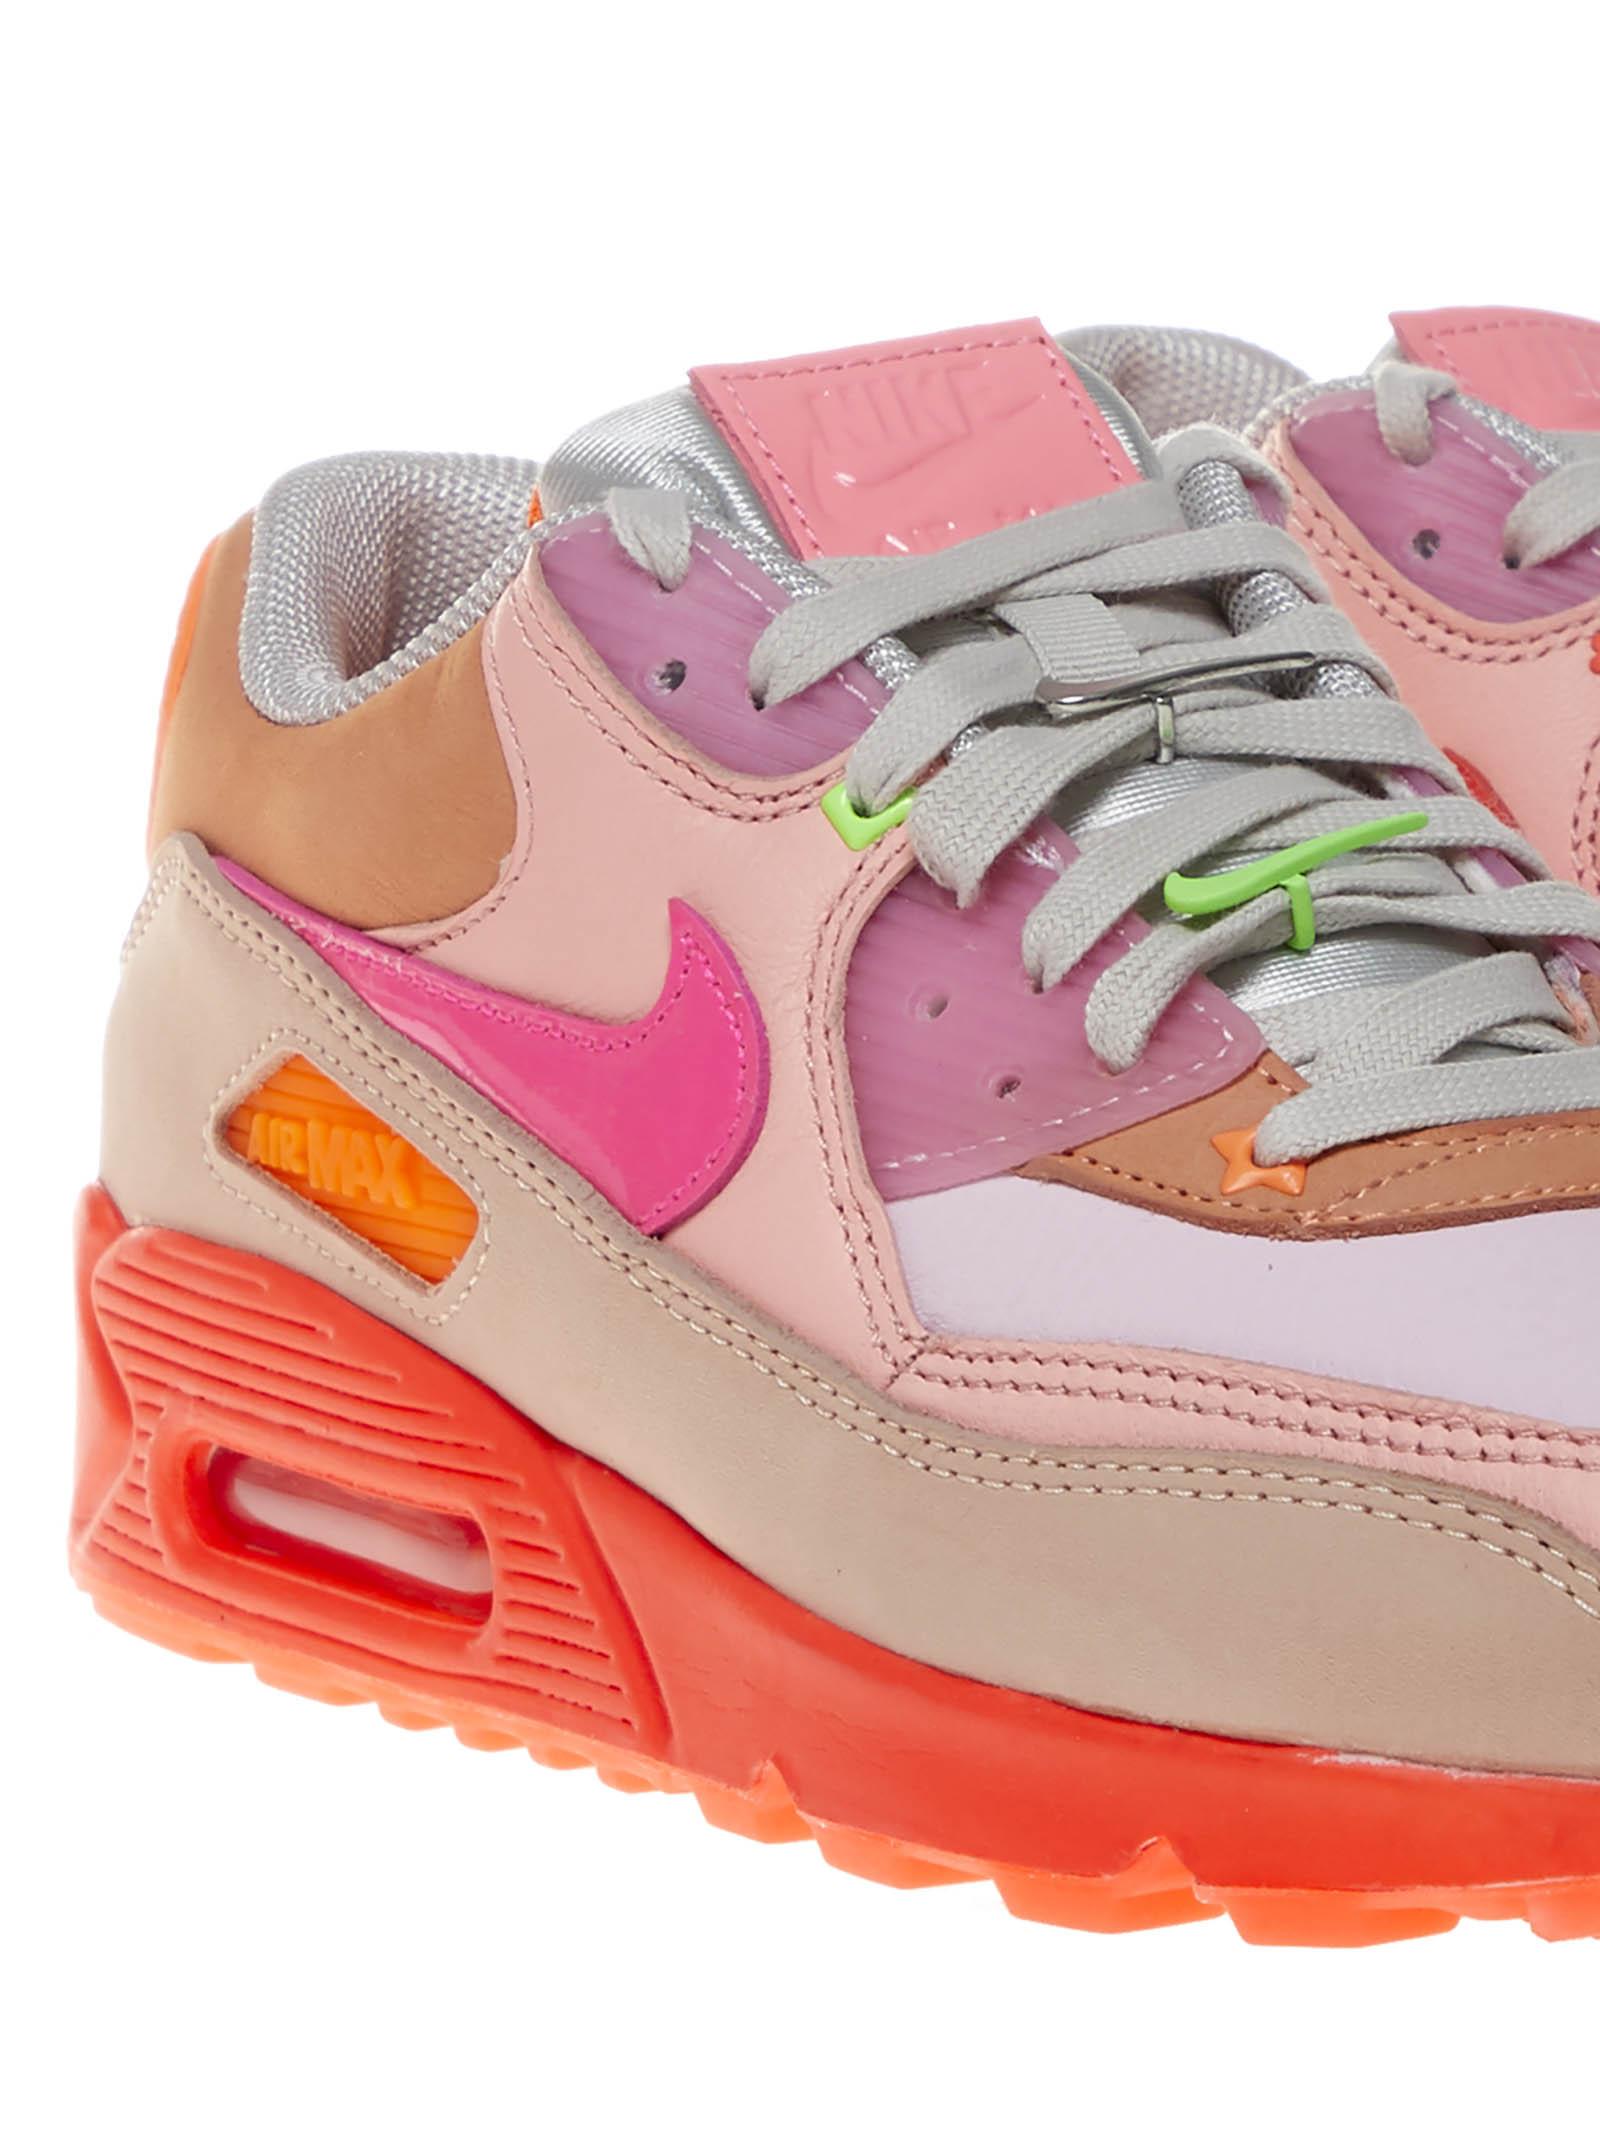 Medisch eiwit Getuigen Nike Pink And Orange Air Max 90 Sneakers With Layered Design And Integrated  Air Technology. | Lyst